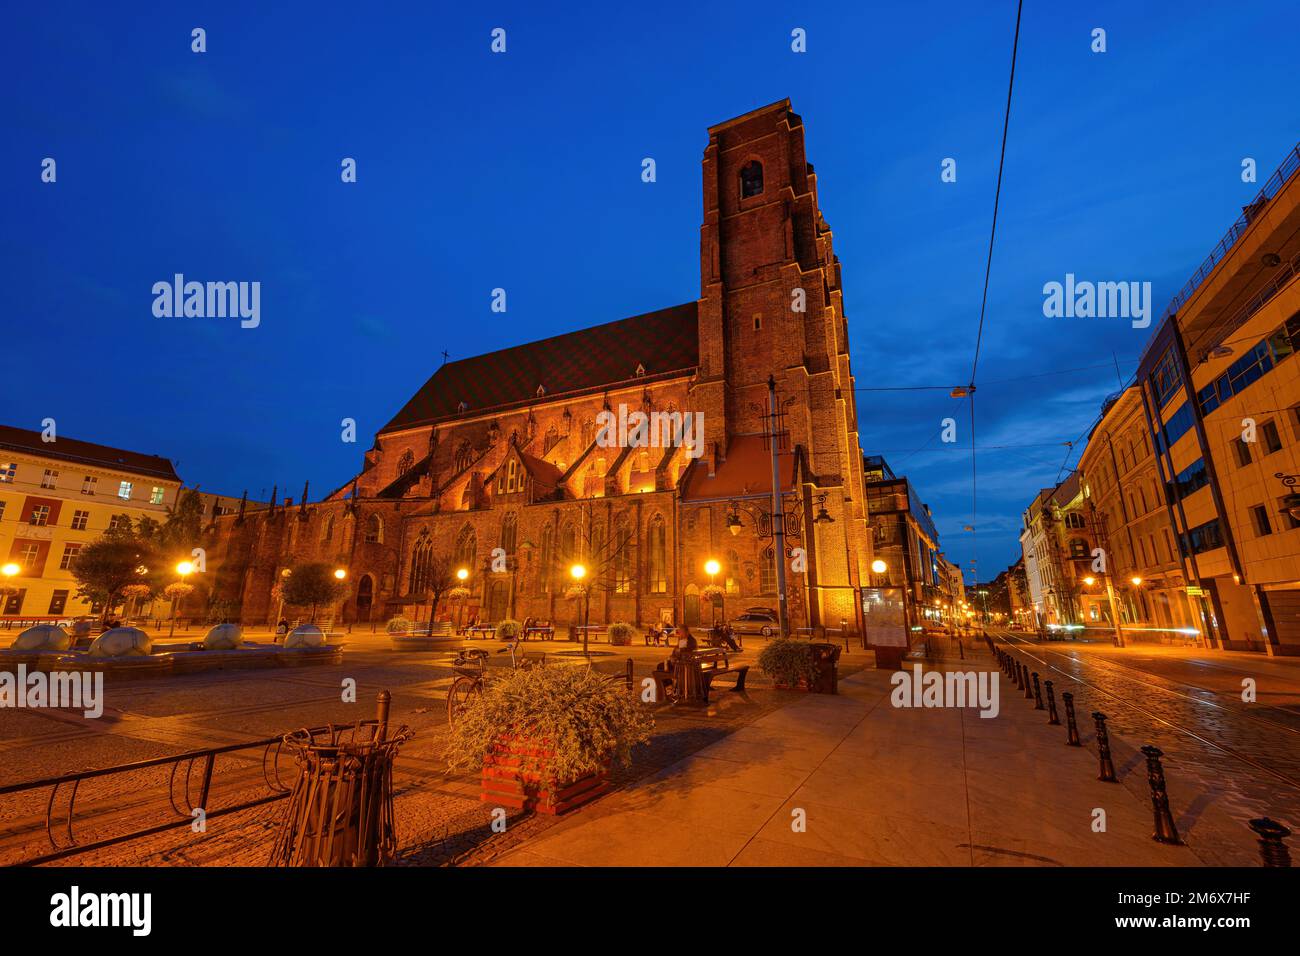 St. Mary Magdalene's Church in Wroclaw Poland. Night photo Stock Photo